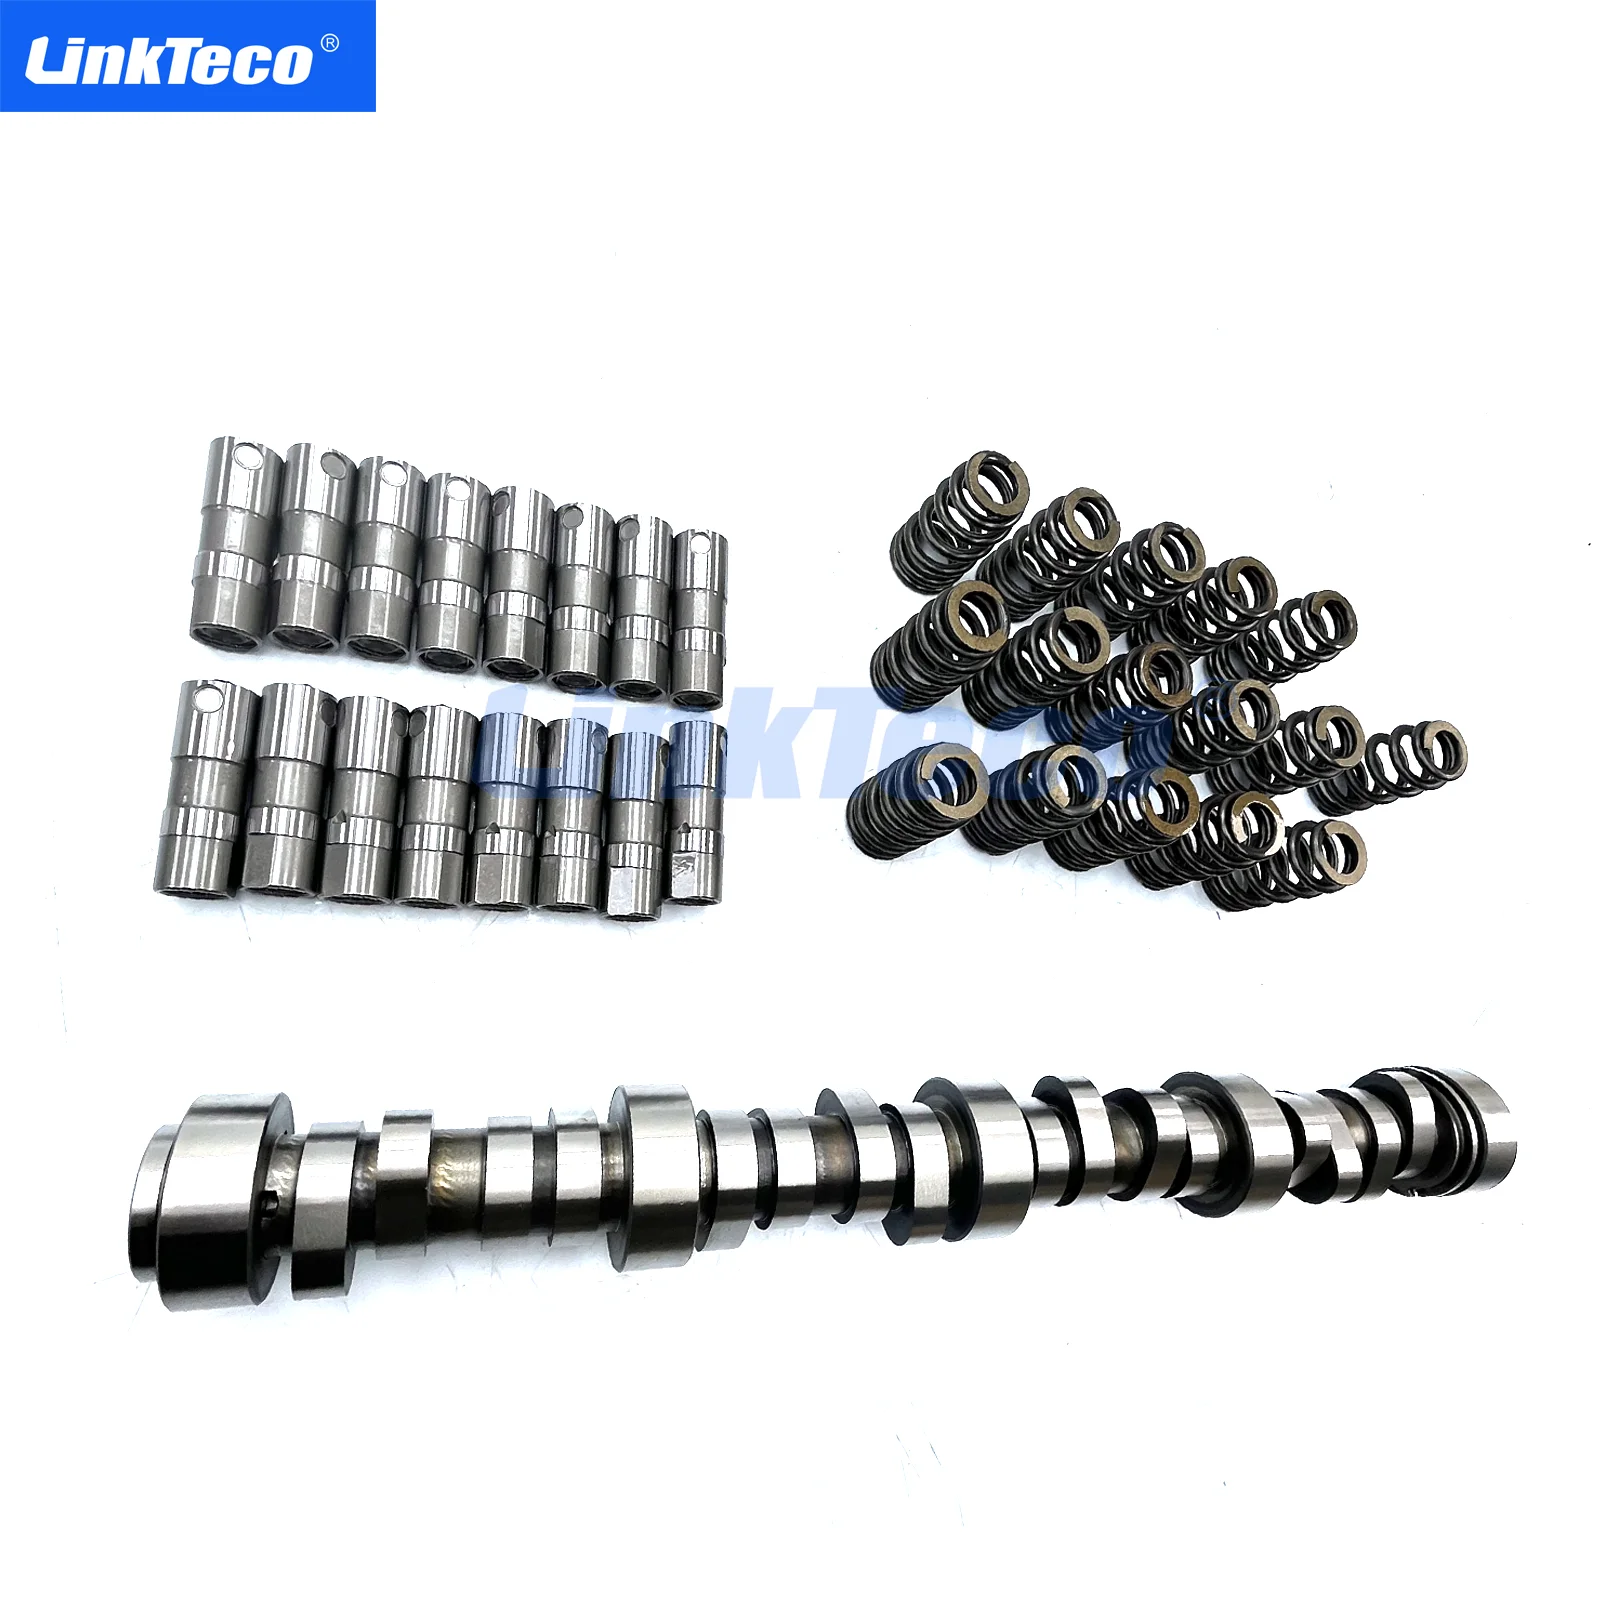 

For E1840P Sloppy Stage 2 Cam Camshaft Lifters Spring Kit for Chevy LS LS1 .585"